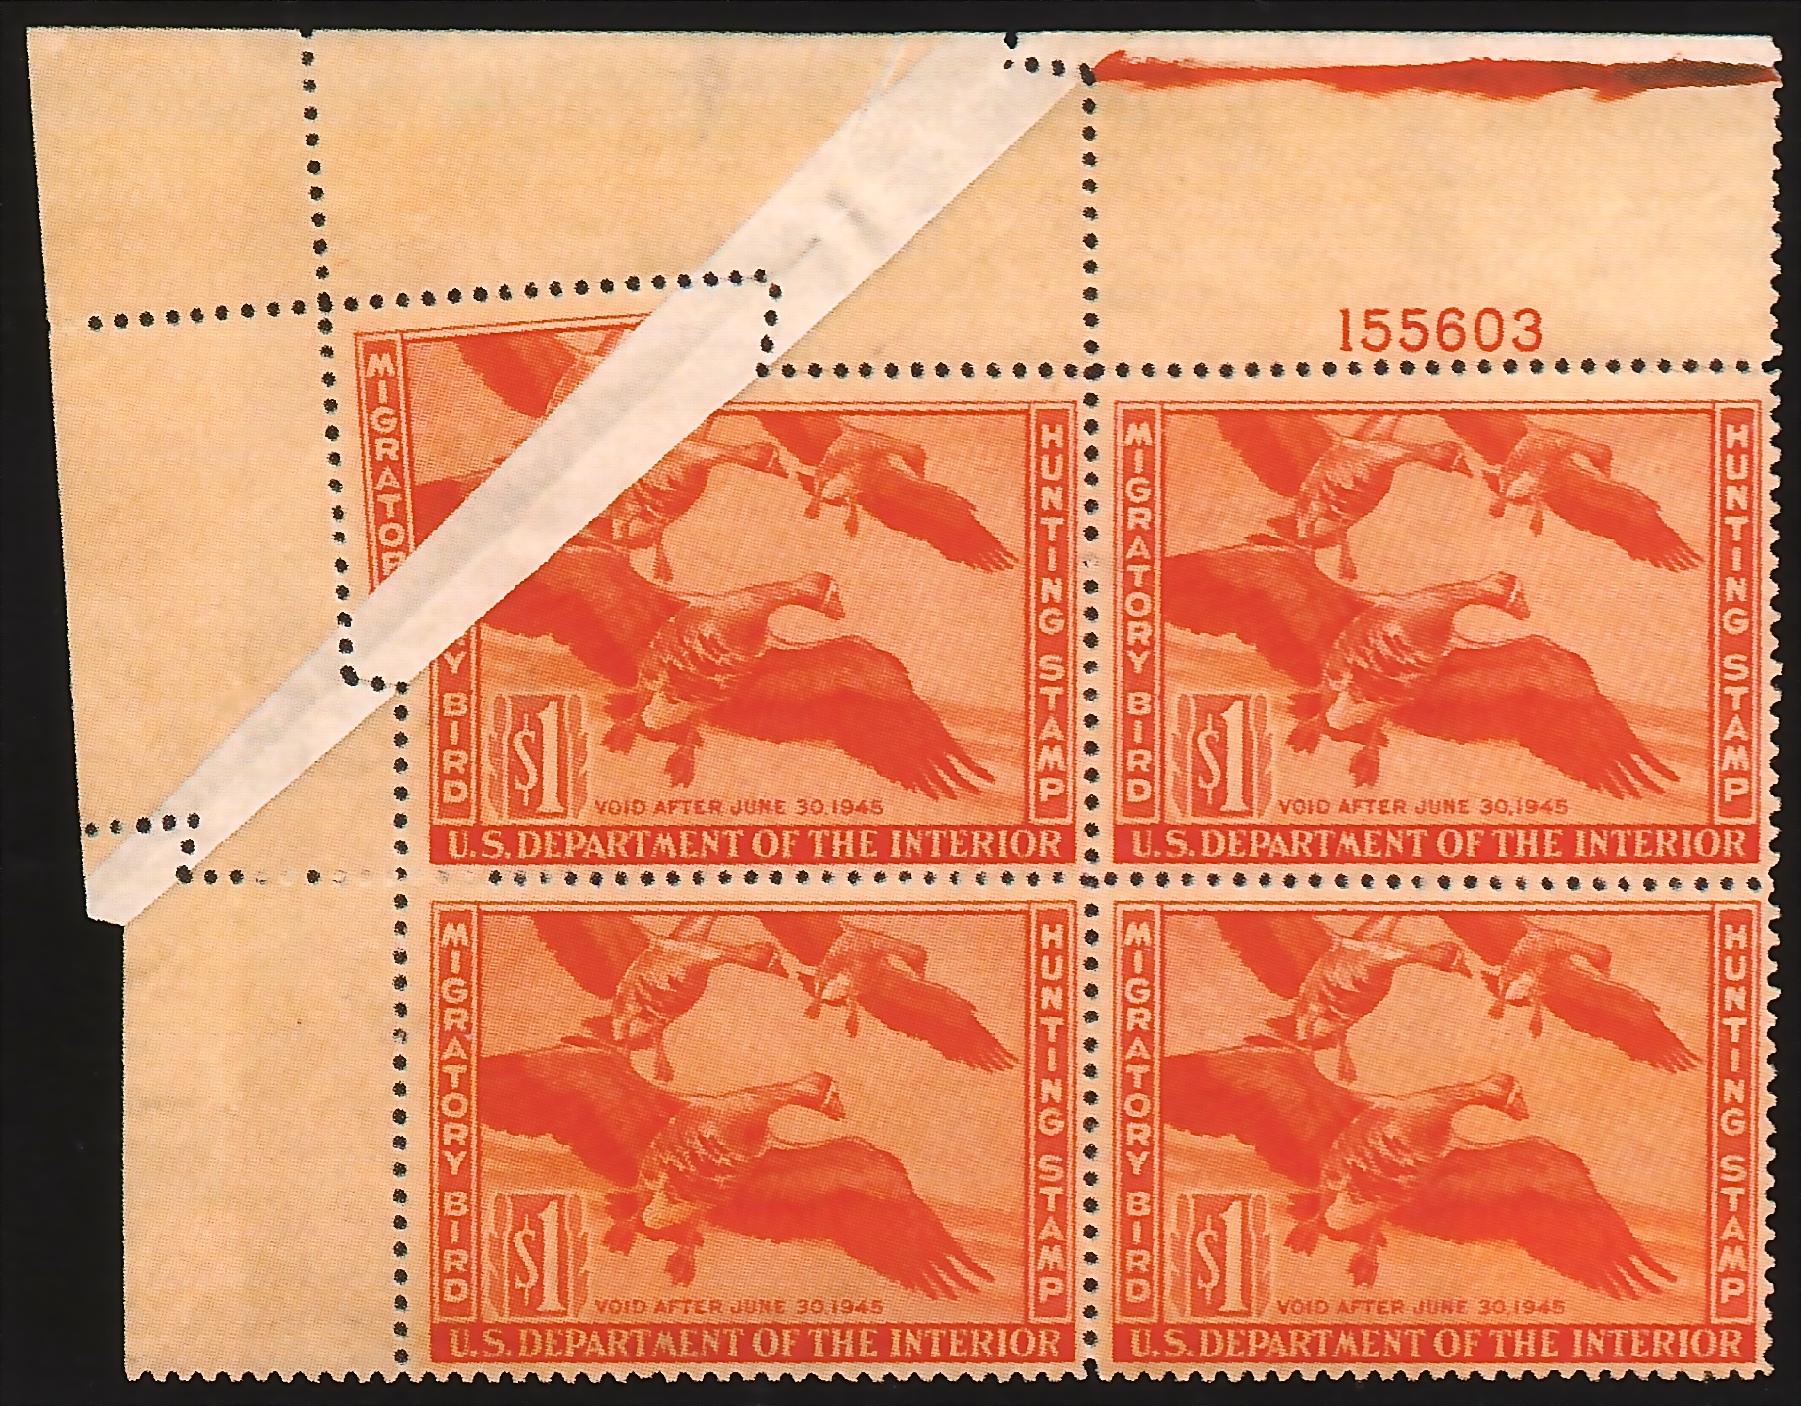 RW11 (1944-45) UL Block of Four with Paper Fold